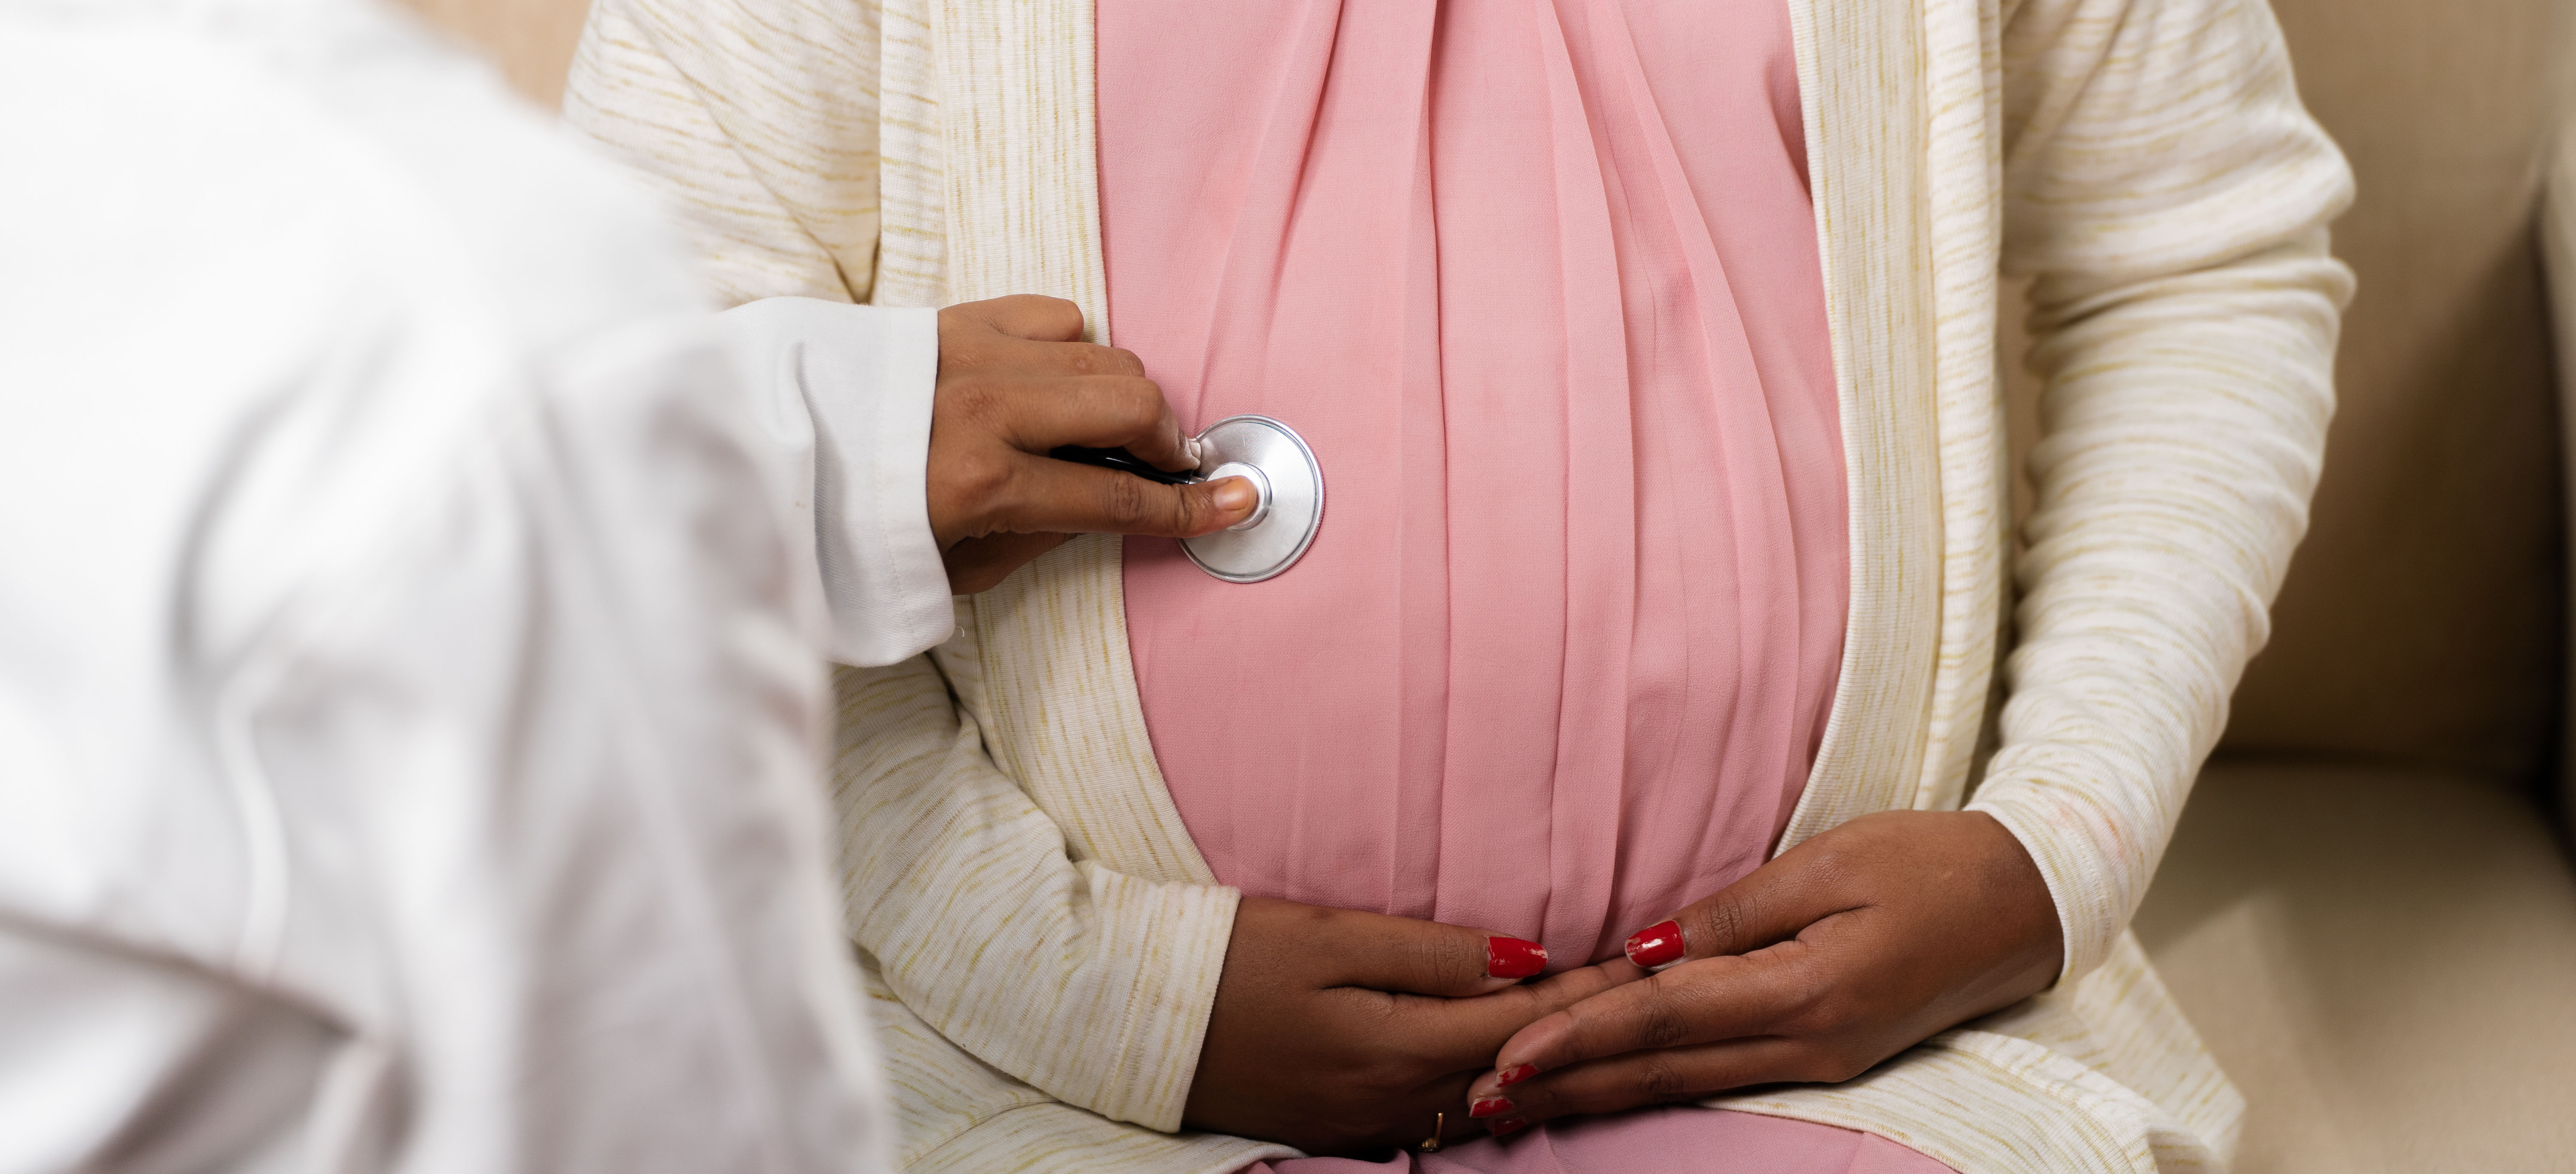 a photo of a pregnant woman holding her stomach, a doctor is holding a stethoscope up to her belly